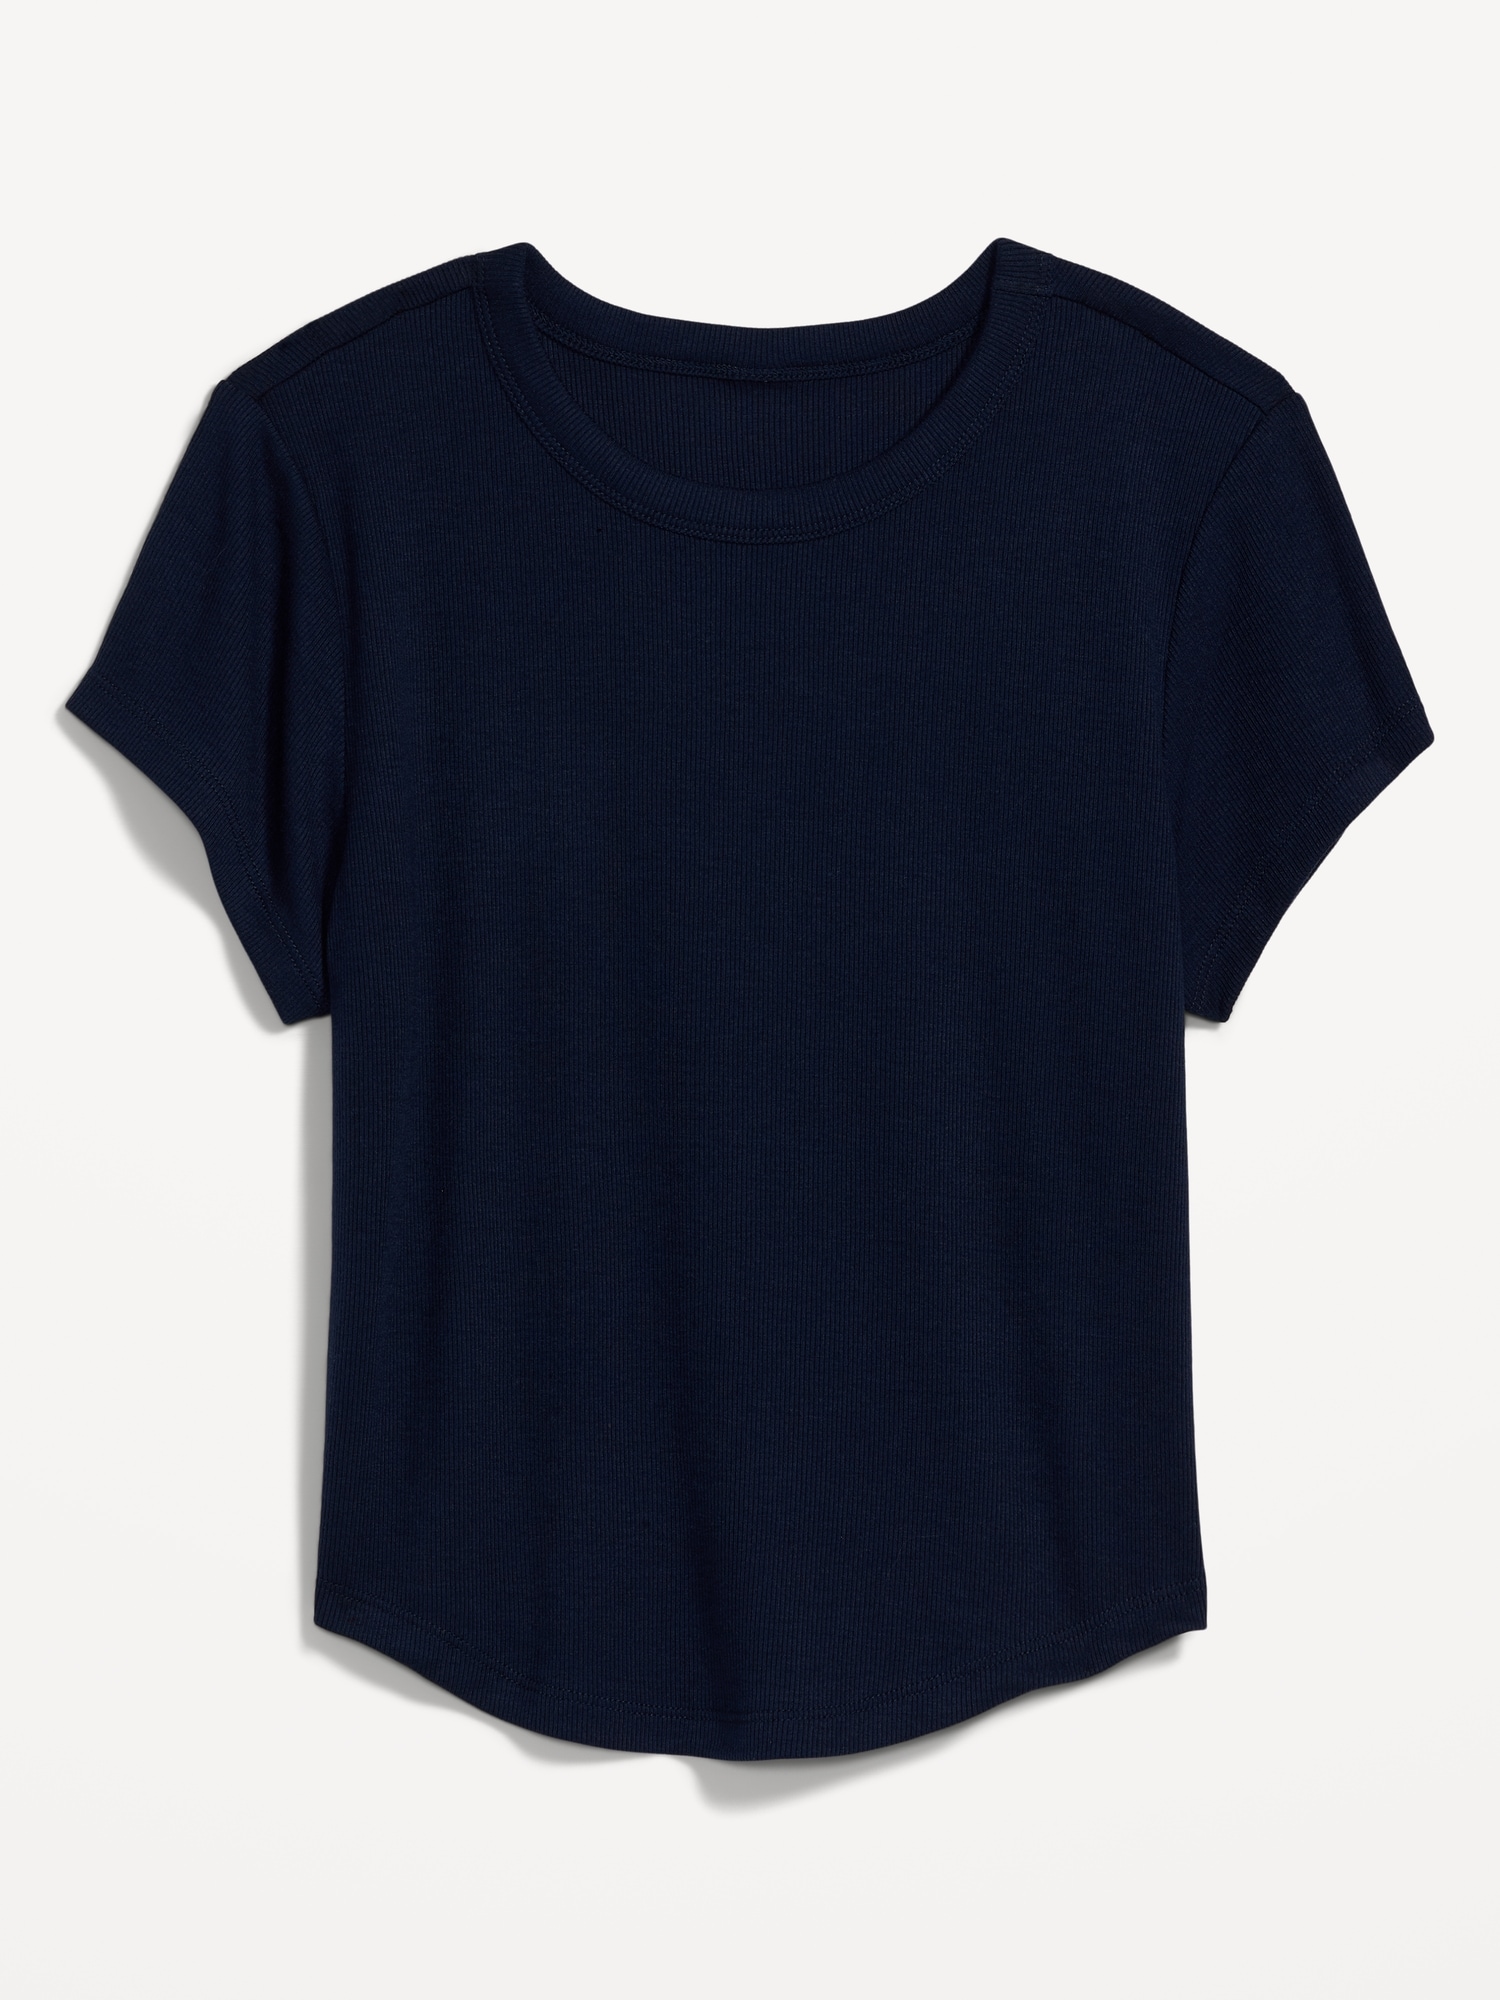 UltraLite Cropped Rib-Knit T-Shirt for Women | Old Navy